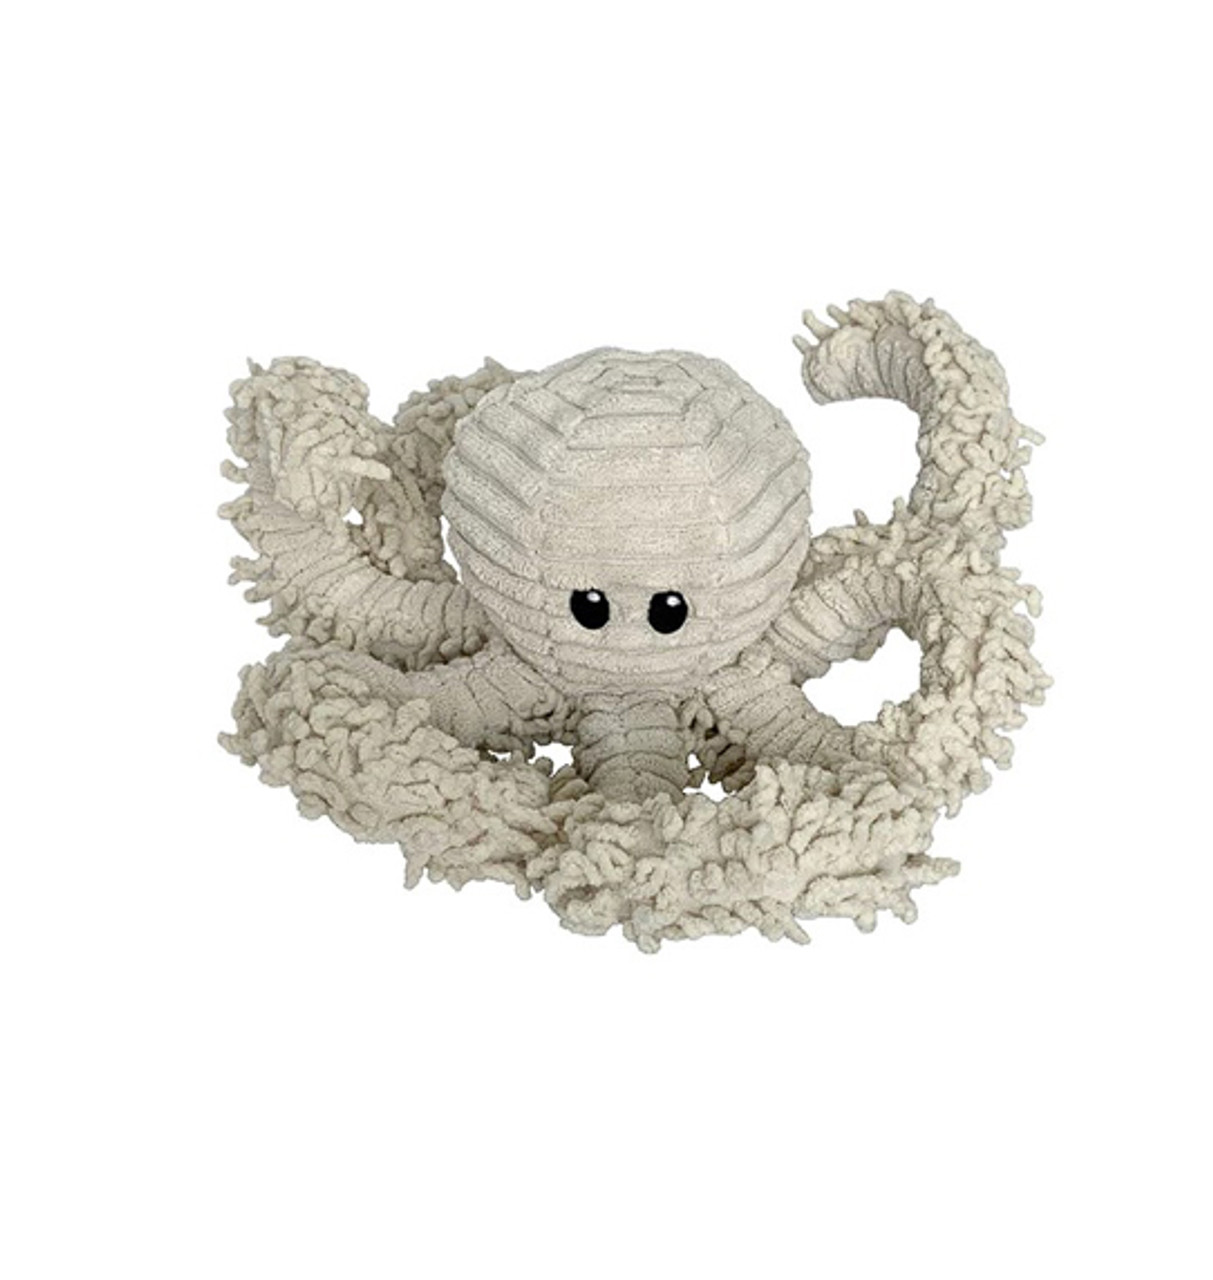 Octopus Small - 9" White